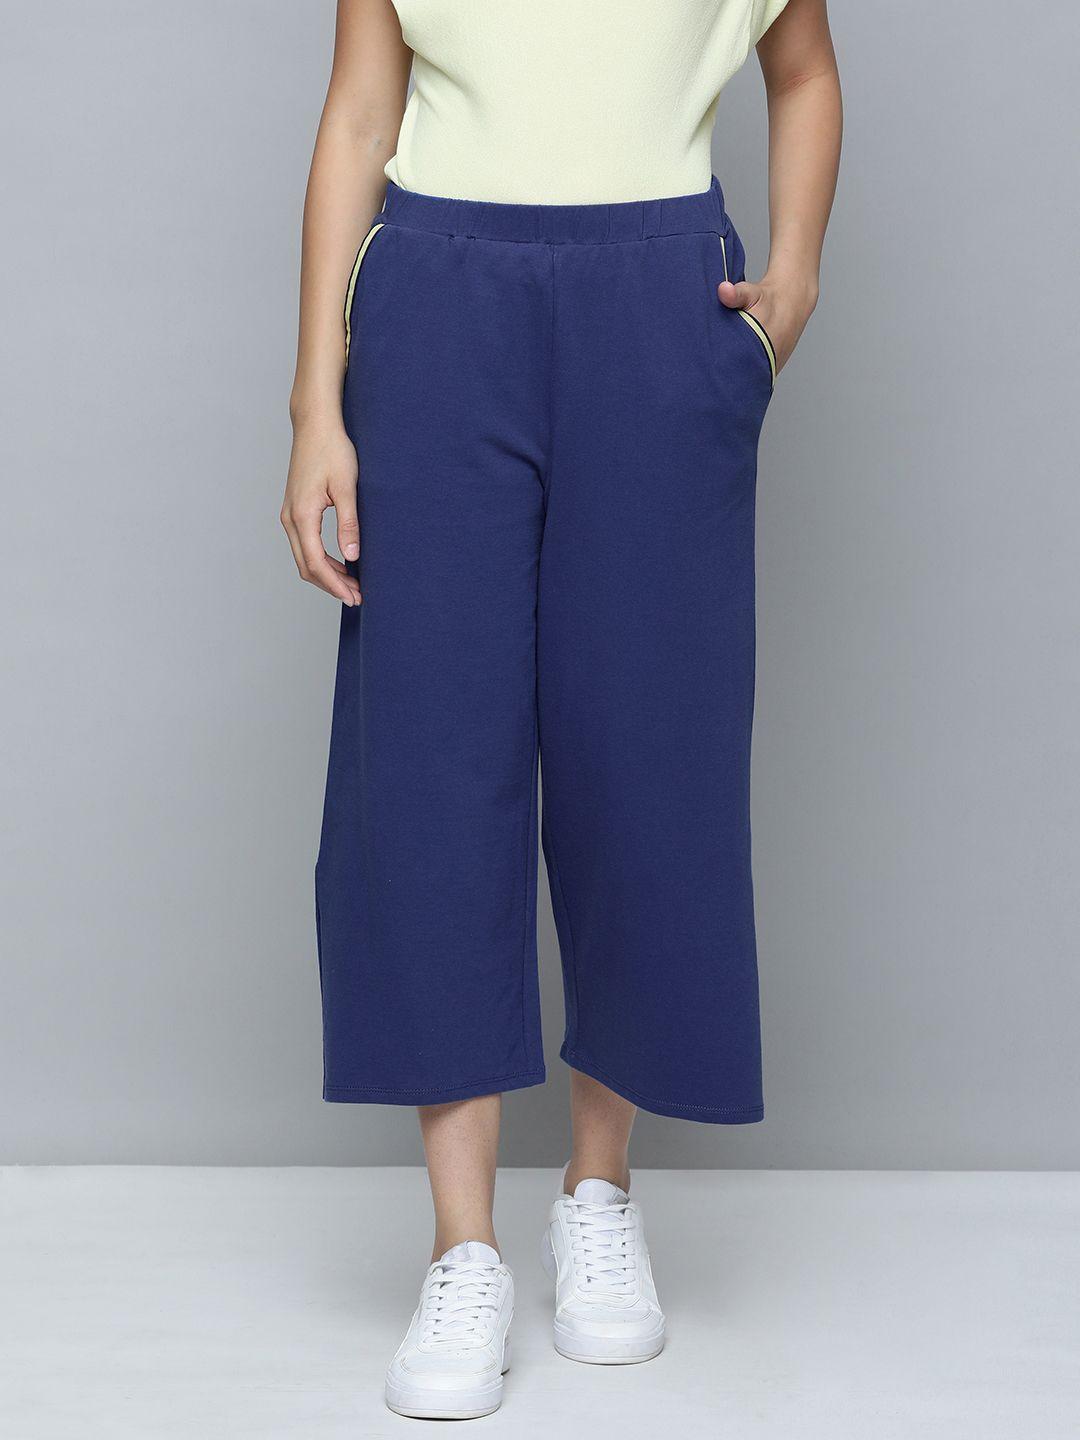 flying-machine-women-blue-relaxed-fit-solid-pure-cotton-cropped-track-pants